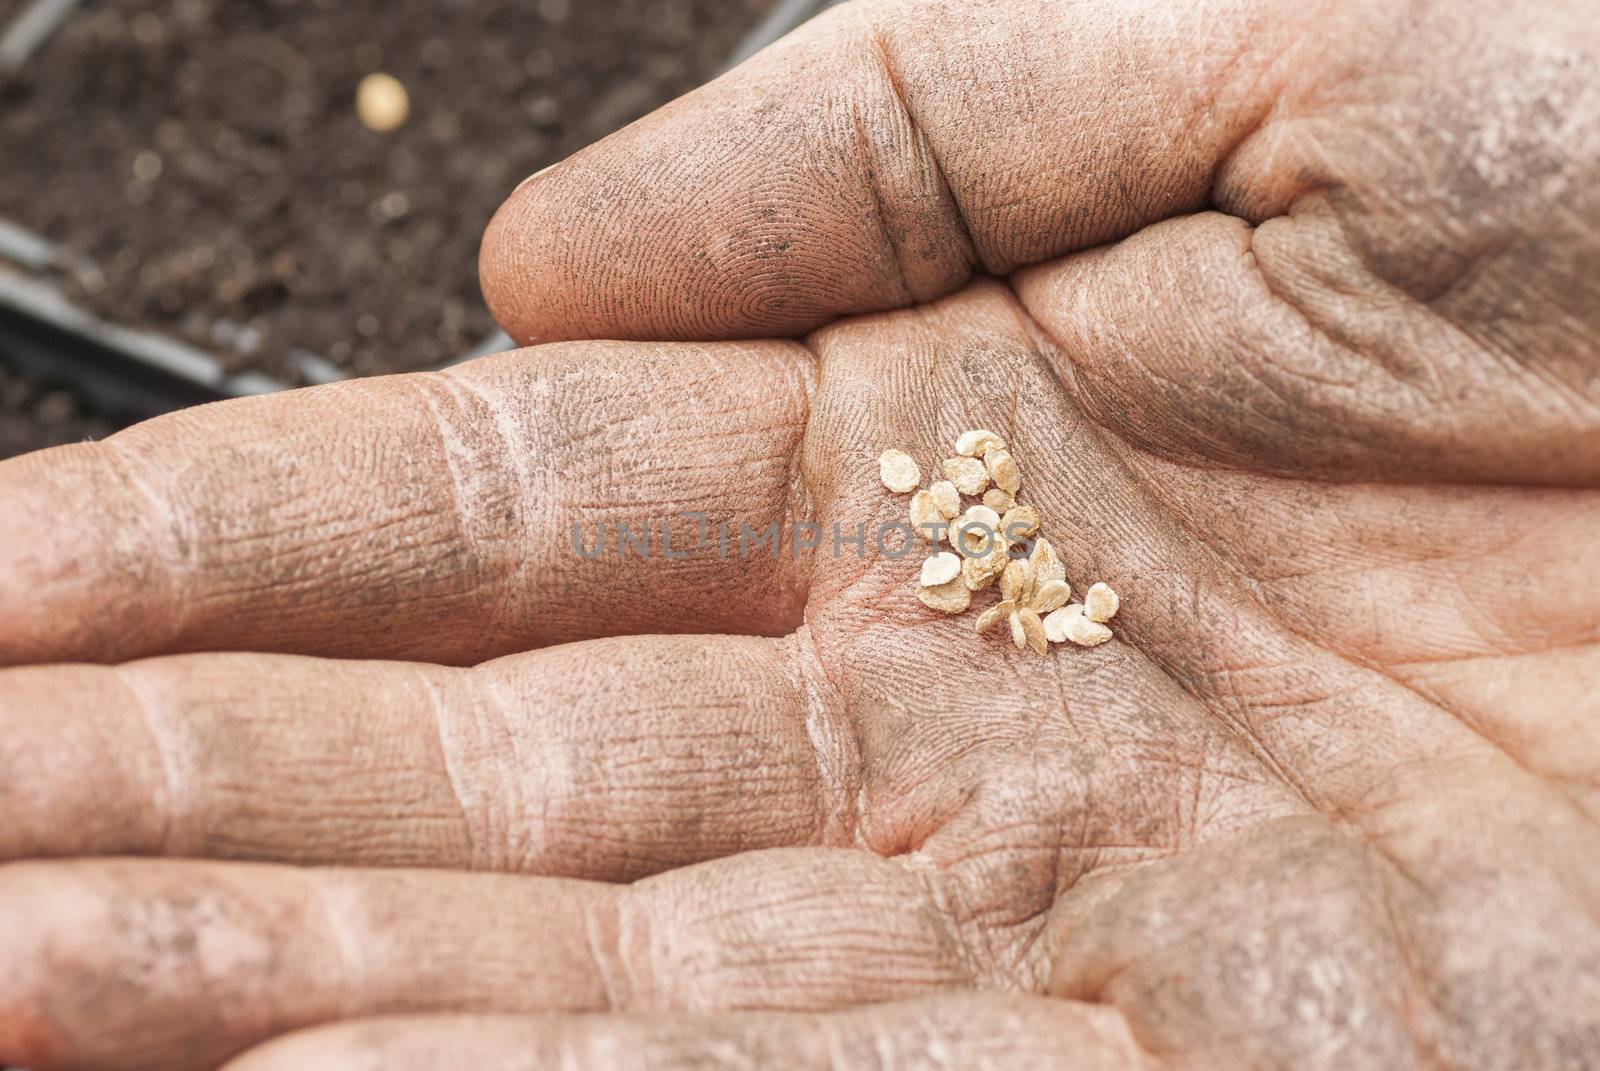 Hand holding tomato seeds ready to sow.